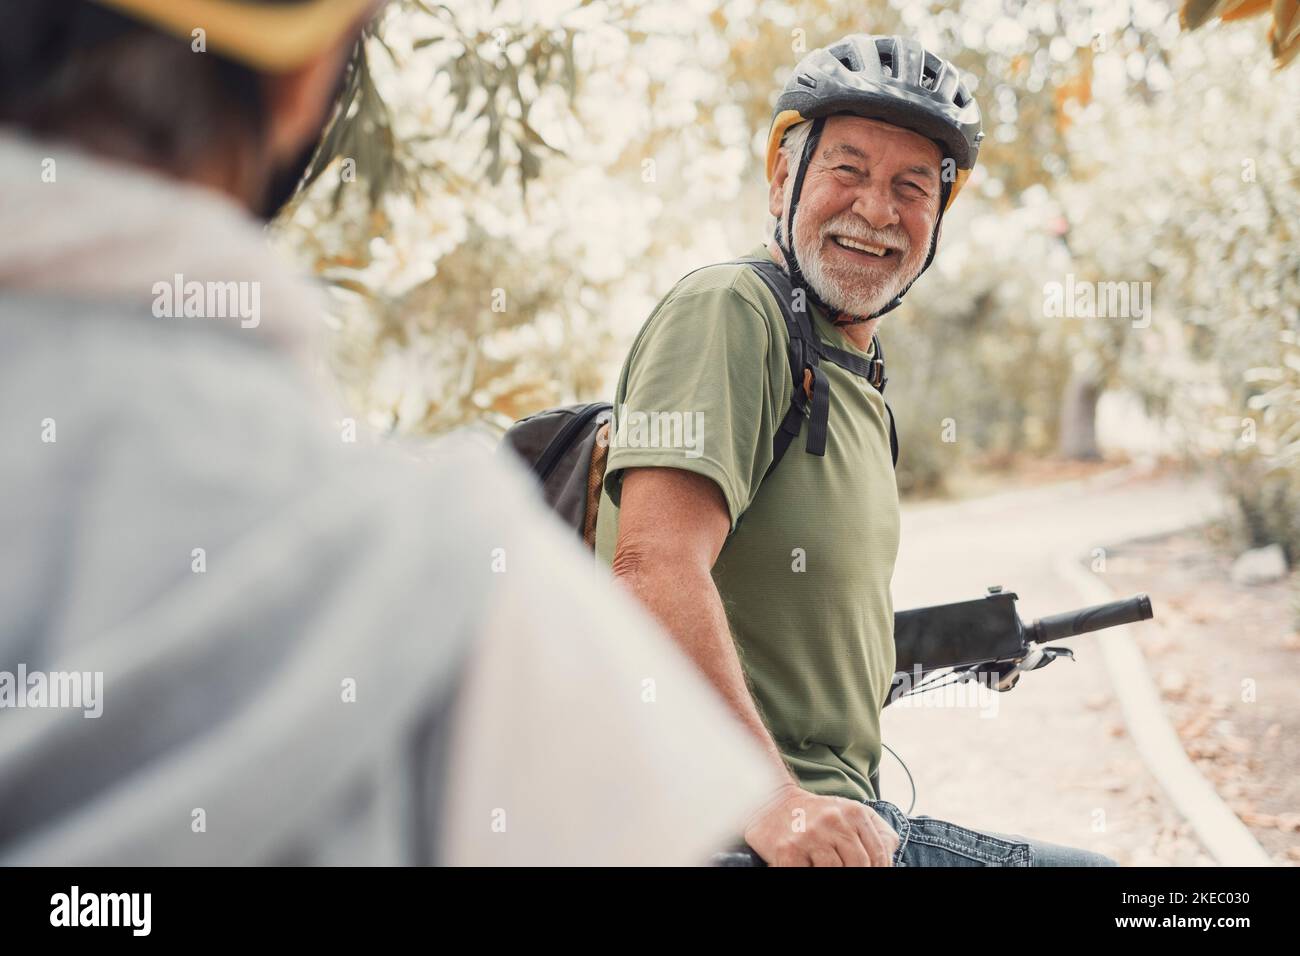 Two happy old mature people enjoying and riding bikes together to be fit and healthy outdoors. Active seniors having fun training in nature. Portrait of one old man smiling in a bike trip with his wife. Woman indicating something and looking at it. Stock Photo